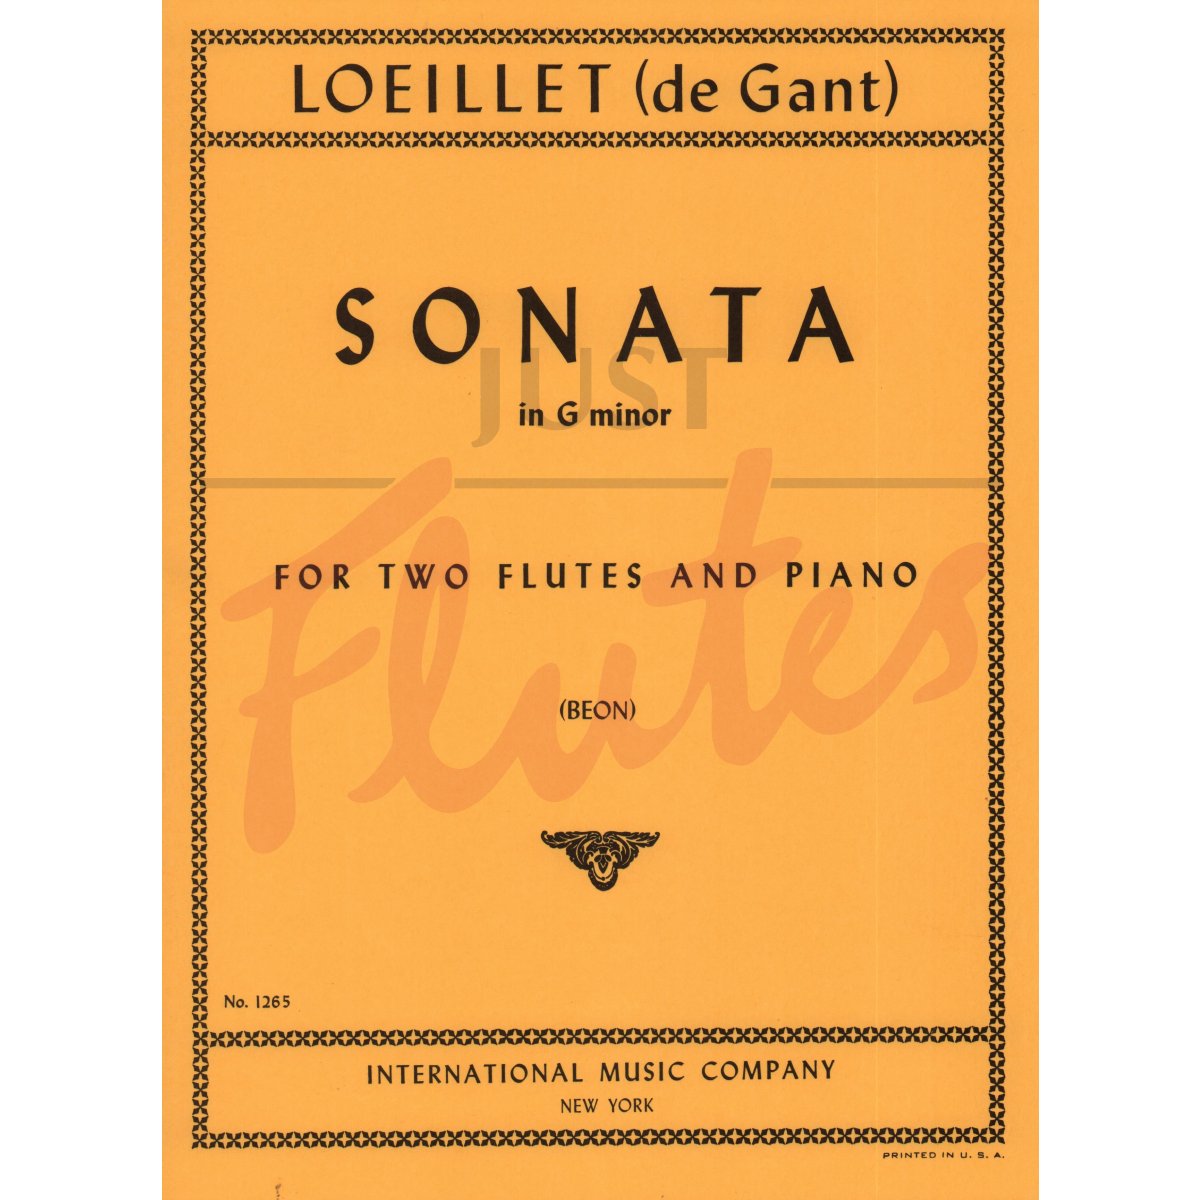 Sonata in G minor for Two Flutes and Piano